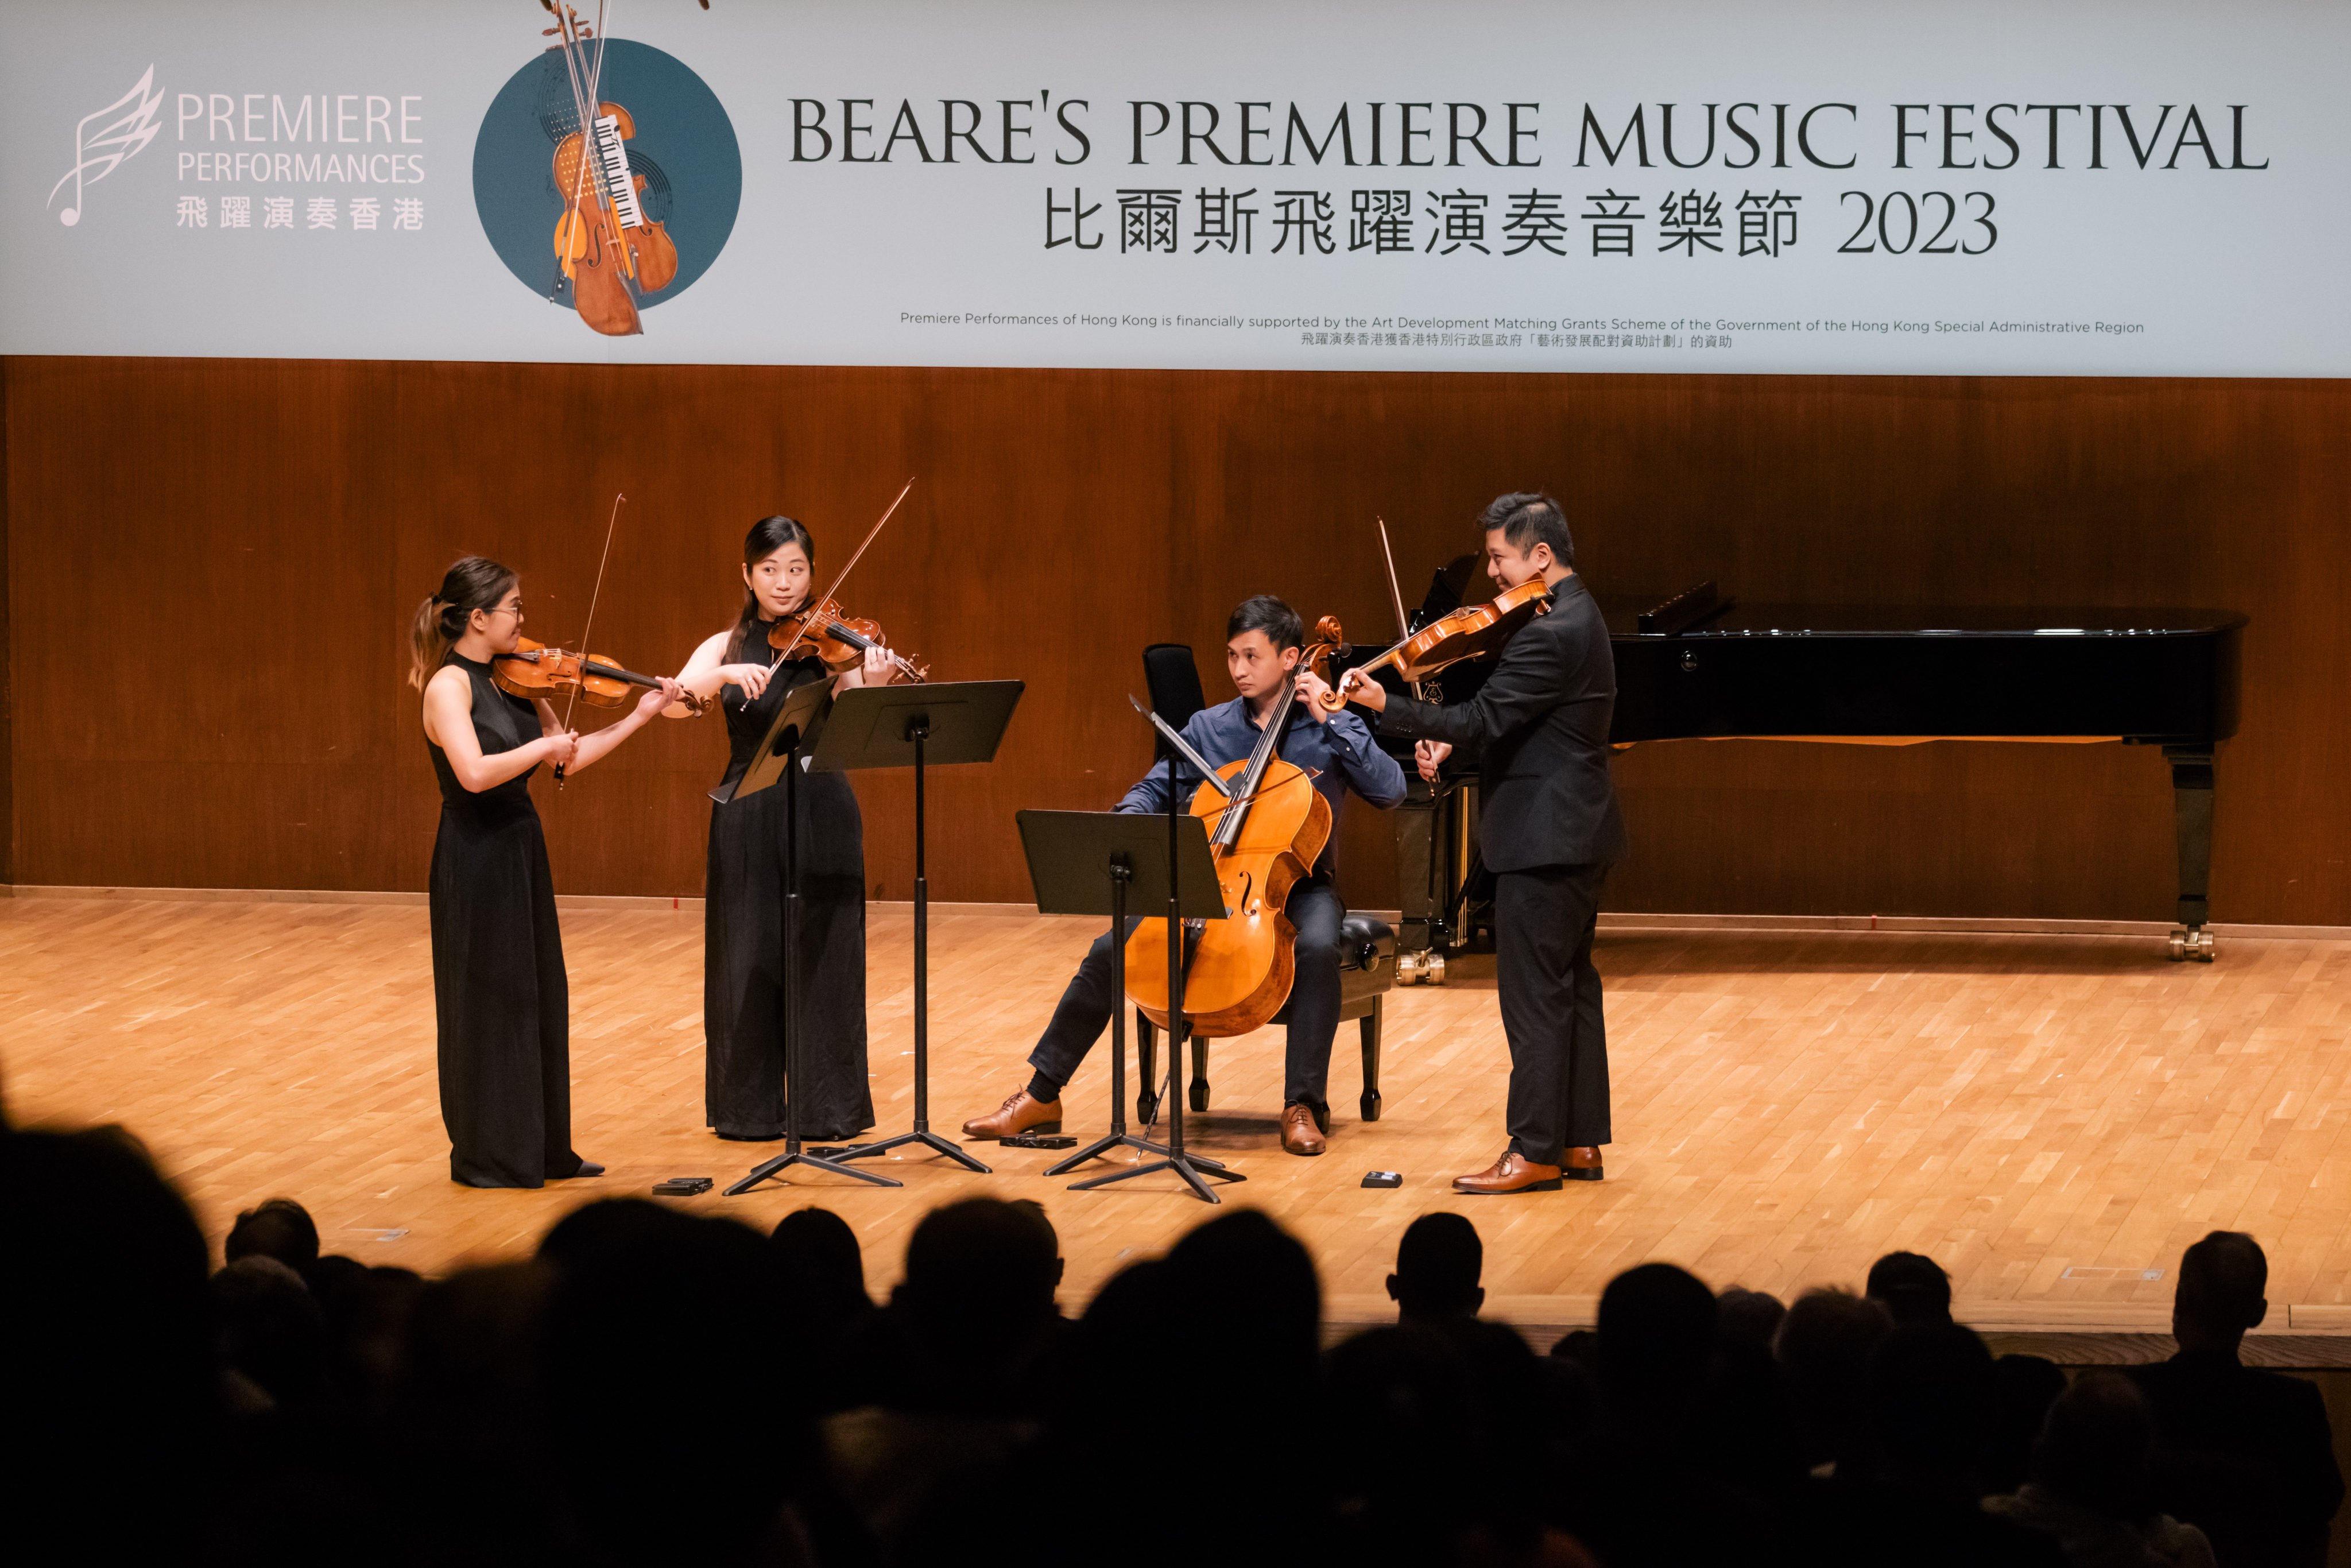 The Romer String Quartet perform during their Beare’s Premiere Music Festival 2023 concert at Hong Kong City Hall on January 9. Photo: Premiere Performances of Hong Kong